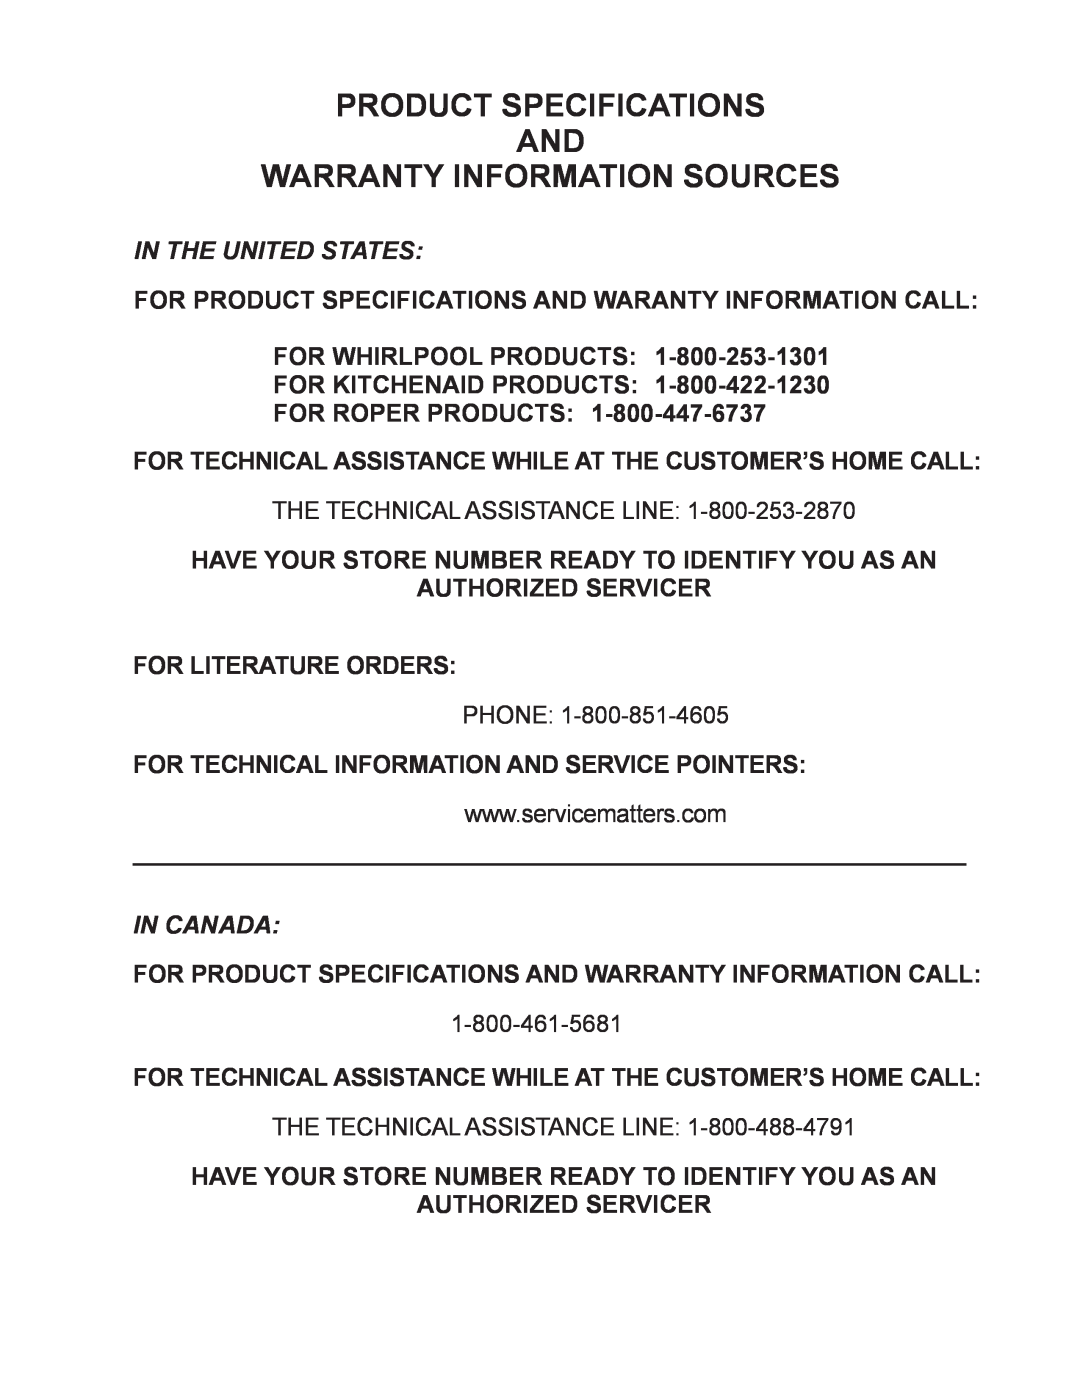 Whirlpool AD35DSS, AD50DSS manual Product Specifications And, Warranty Information Sources, In The United States, In Canada 